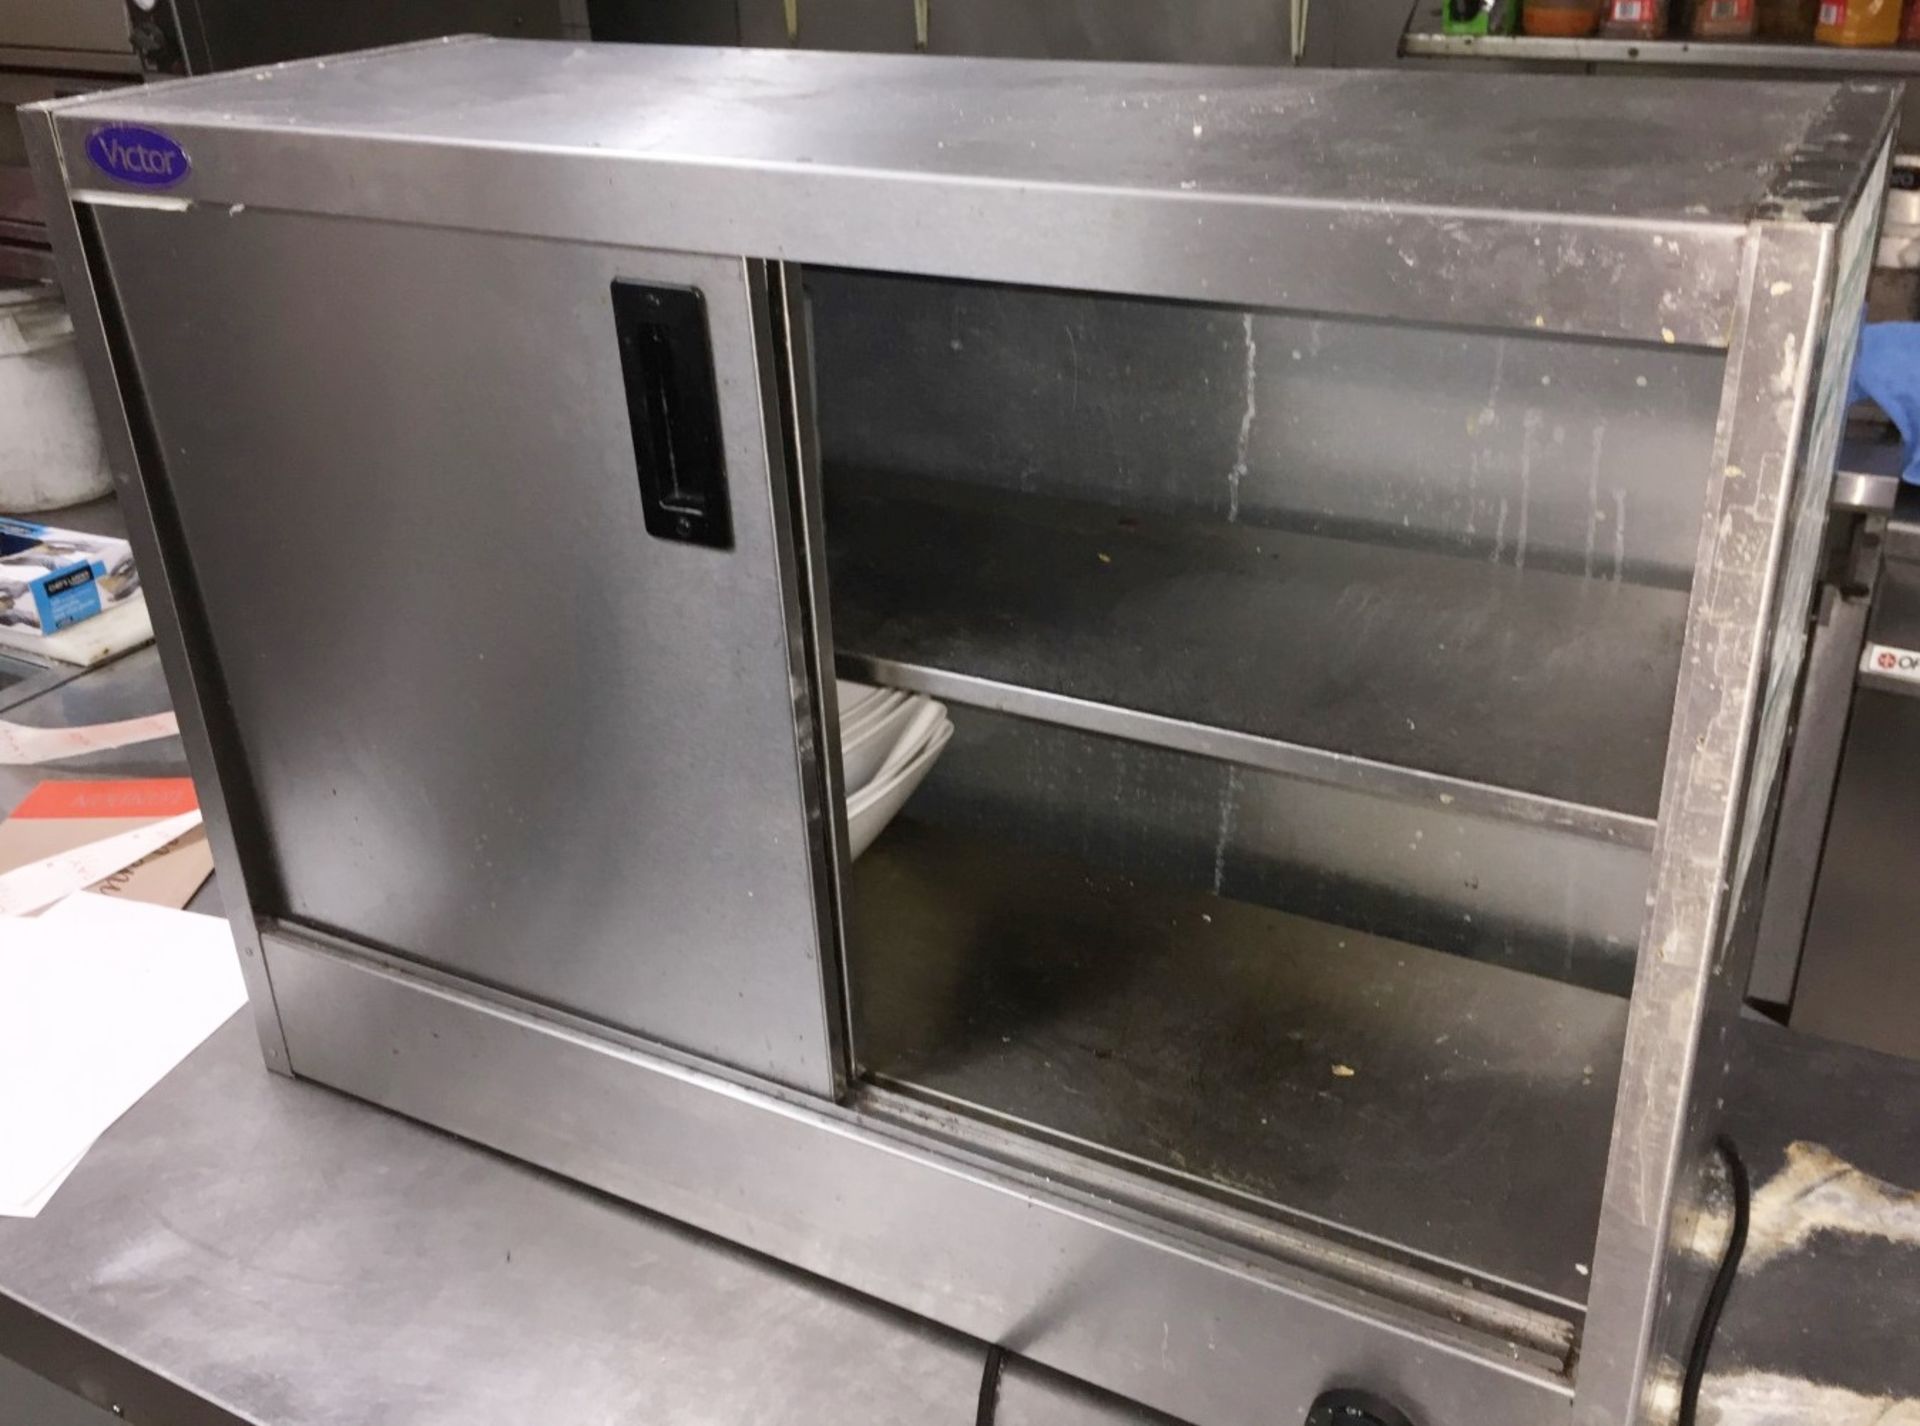 1 x Victor Earl Hot Cupboard - Model Number HED90100 - CL188 - Capacity 18 Plated Meals or 80 x - Image 2 of 6